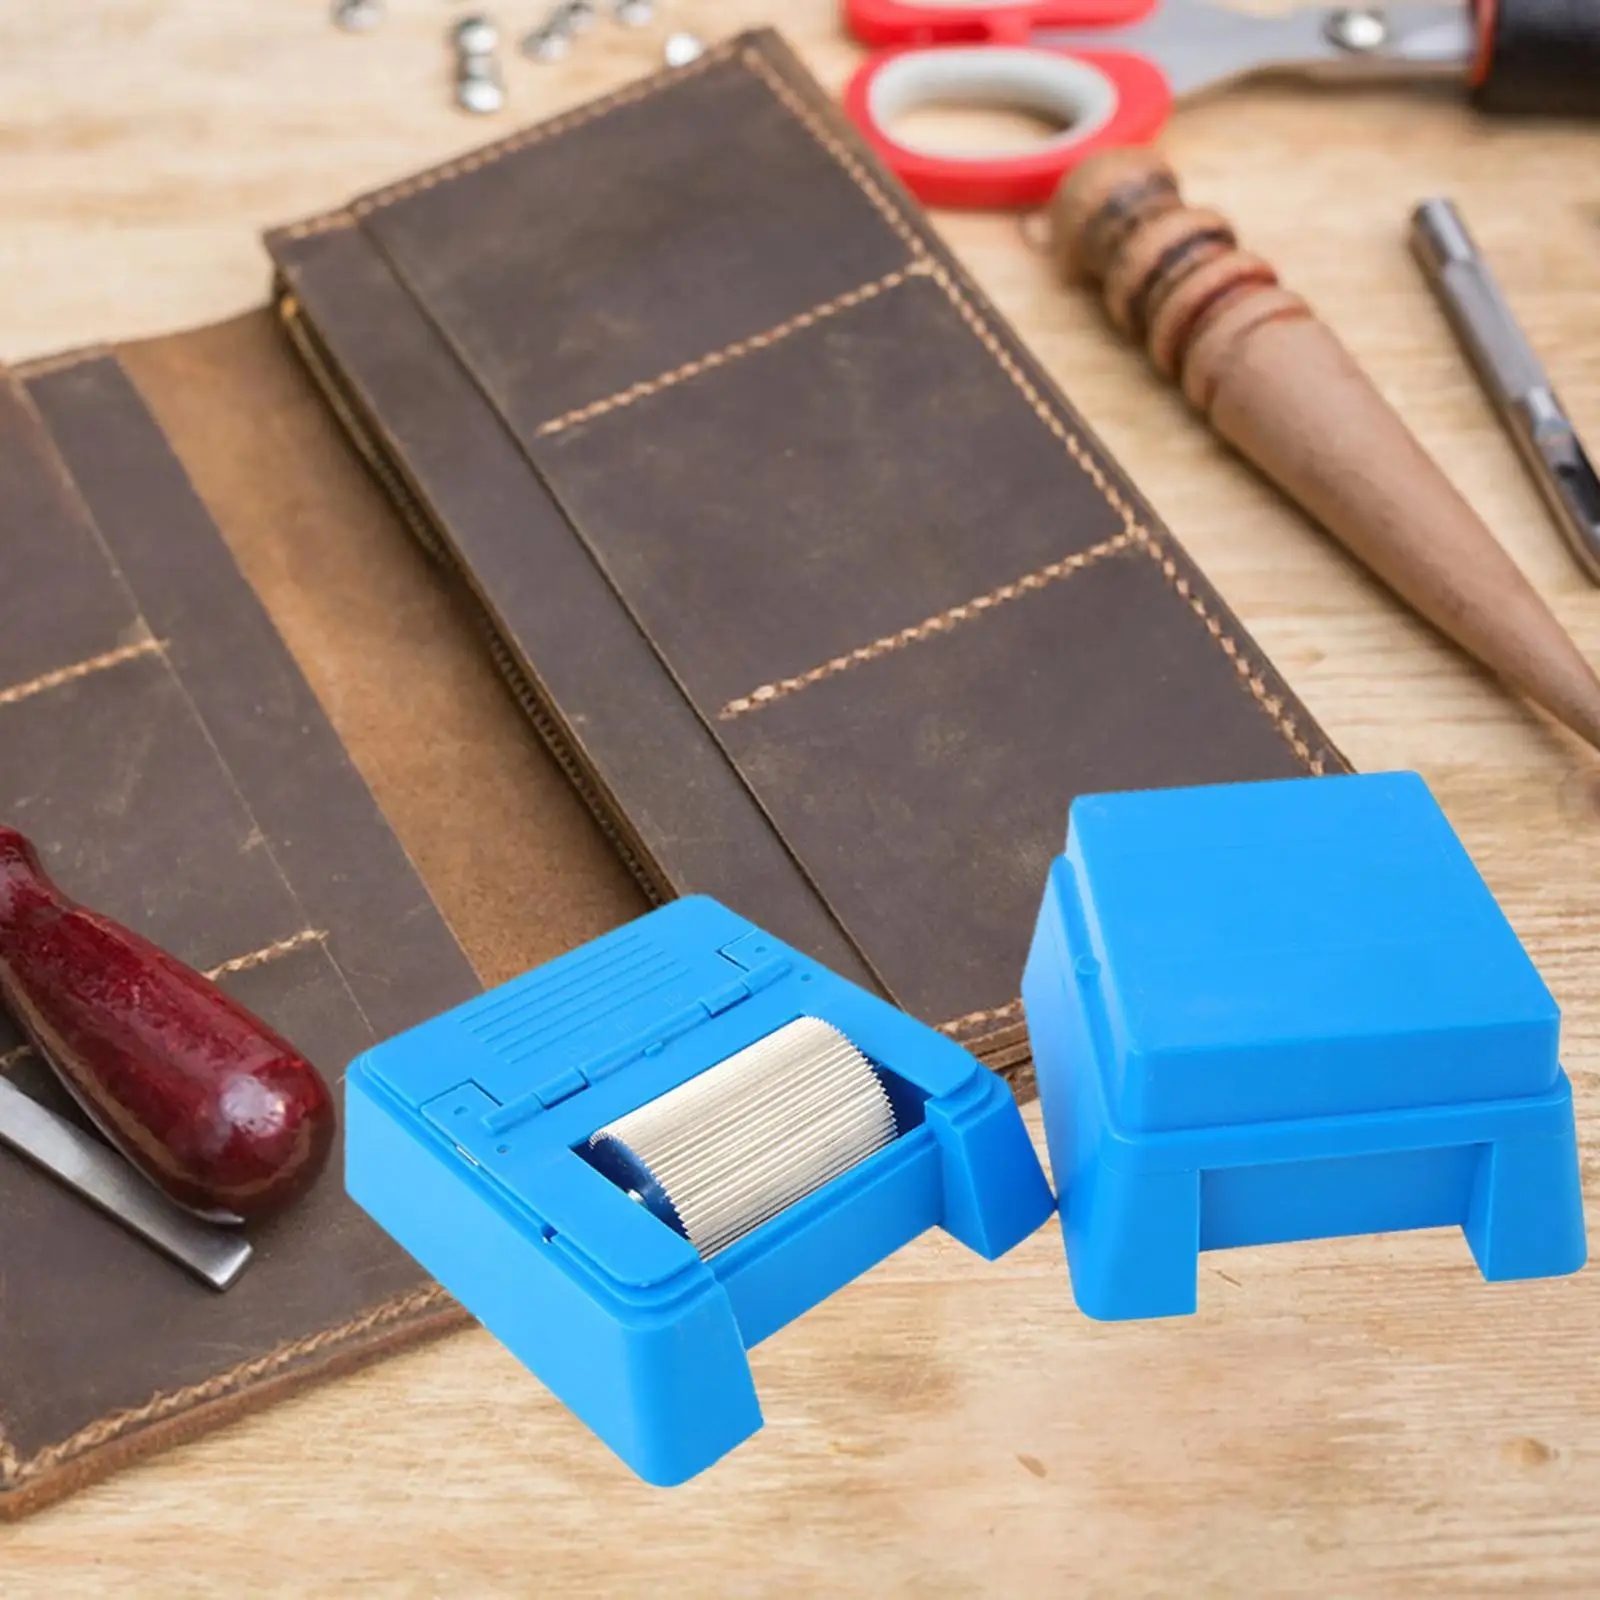 Leather Edge Printing Tool Small Size DIY Paint Craft Leather Painting Box